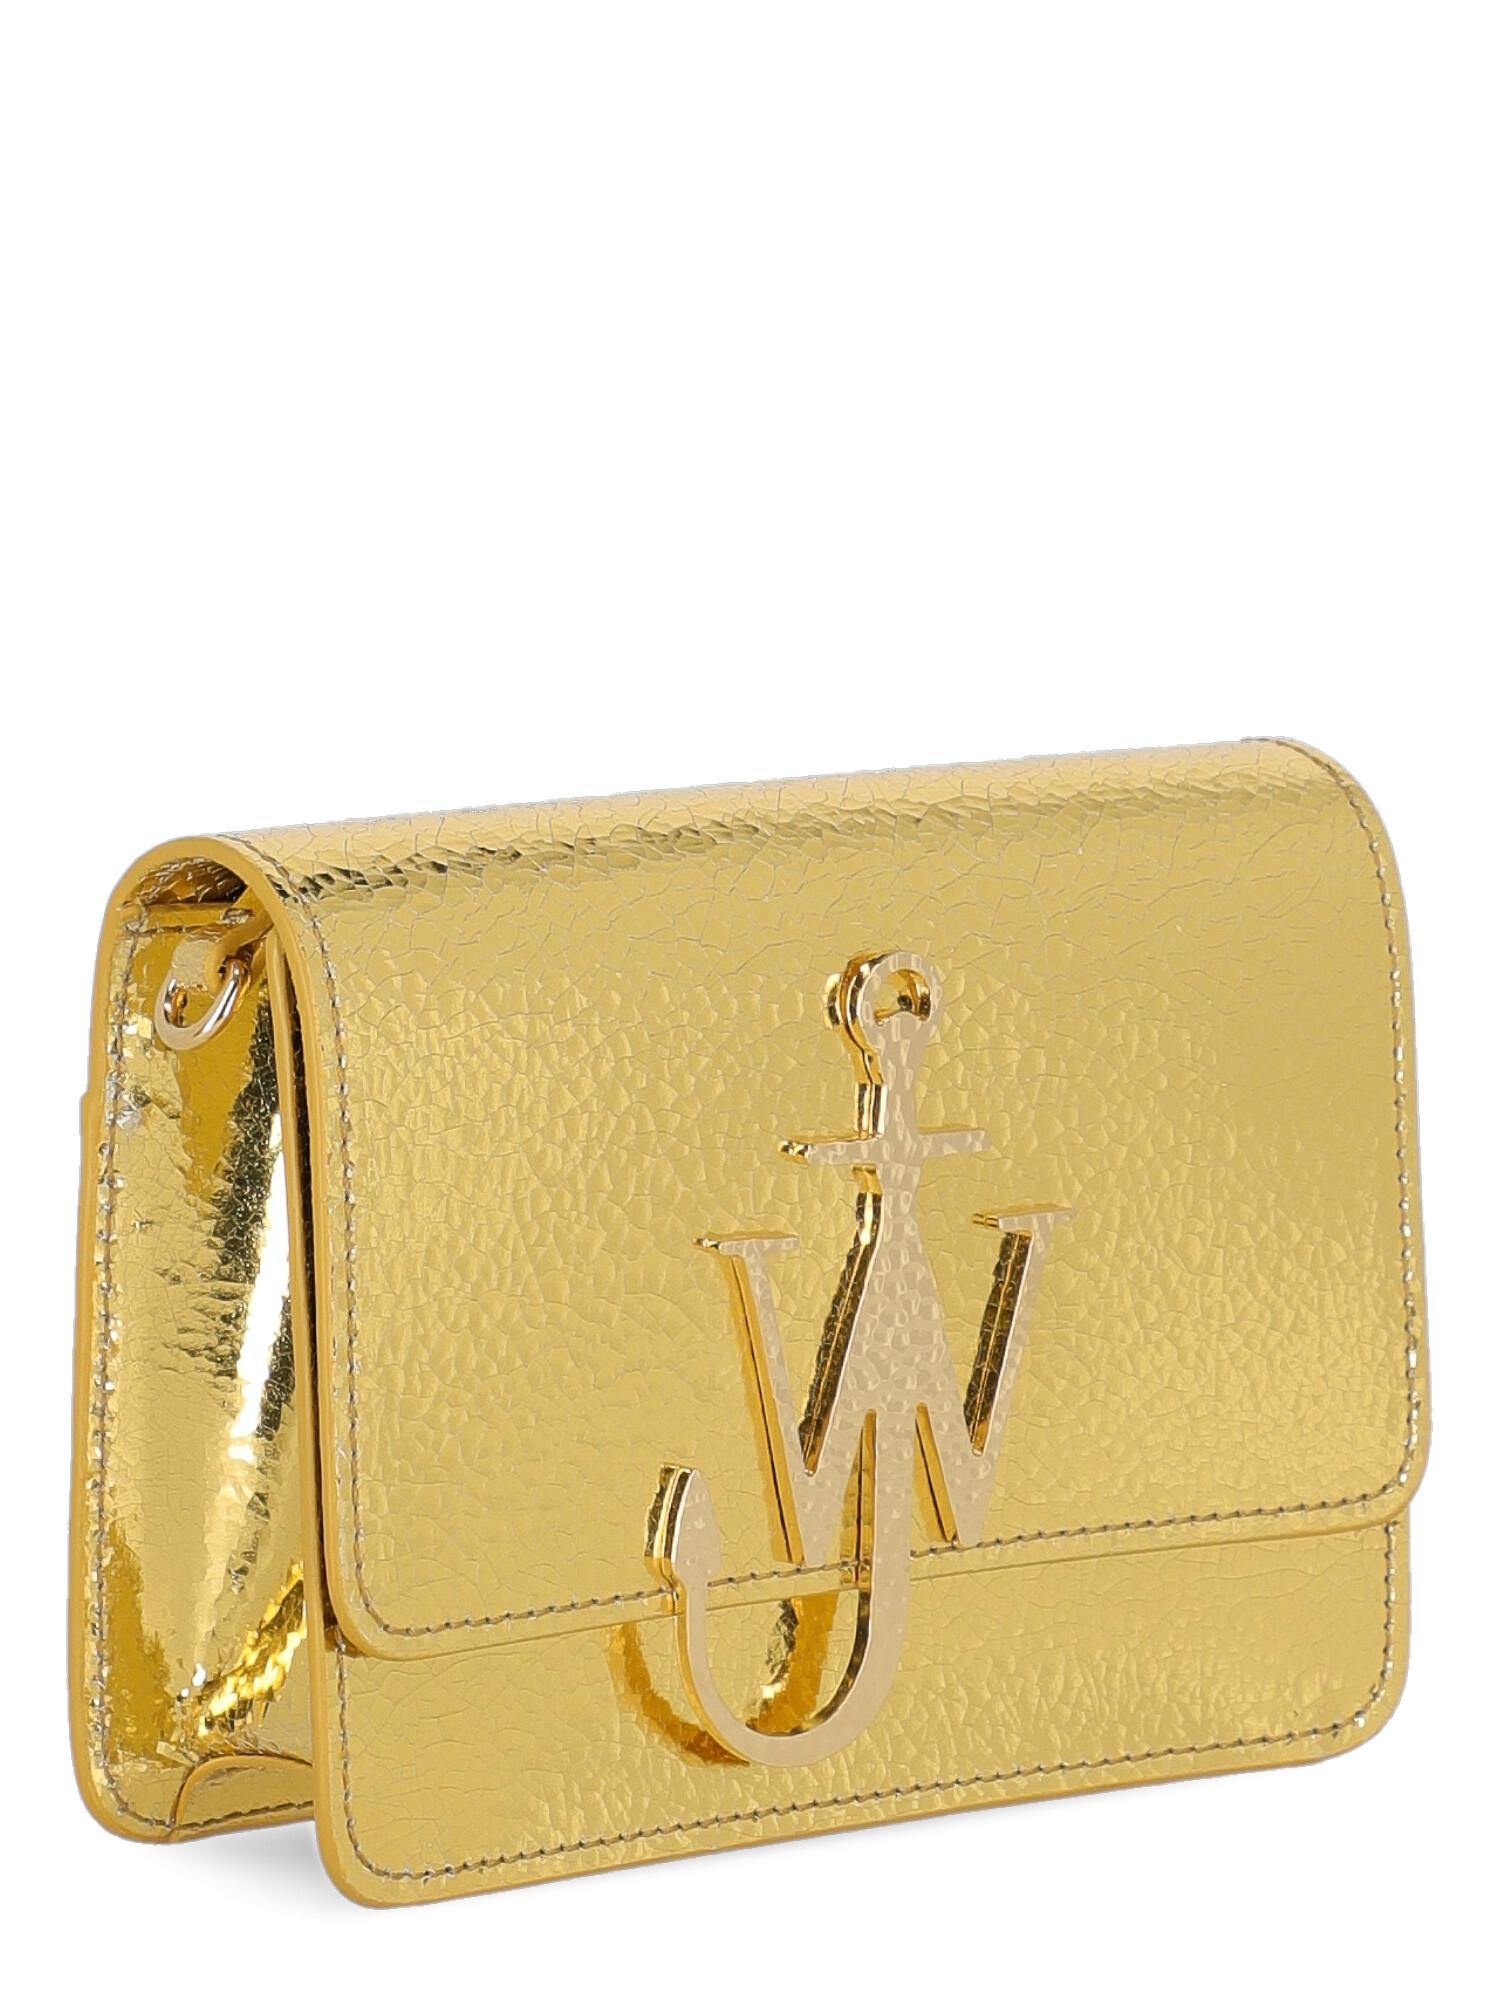 J. W. Anderson Woman Shoulder bag Gold Leather In Excellent Condition For Sale In Milan, IT